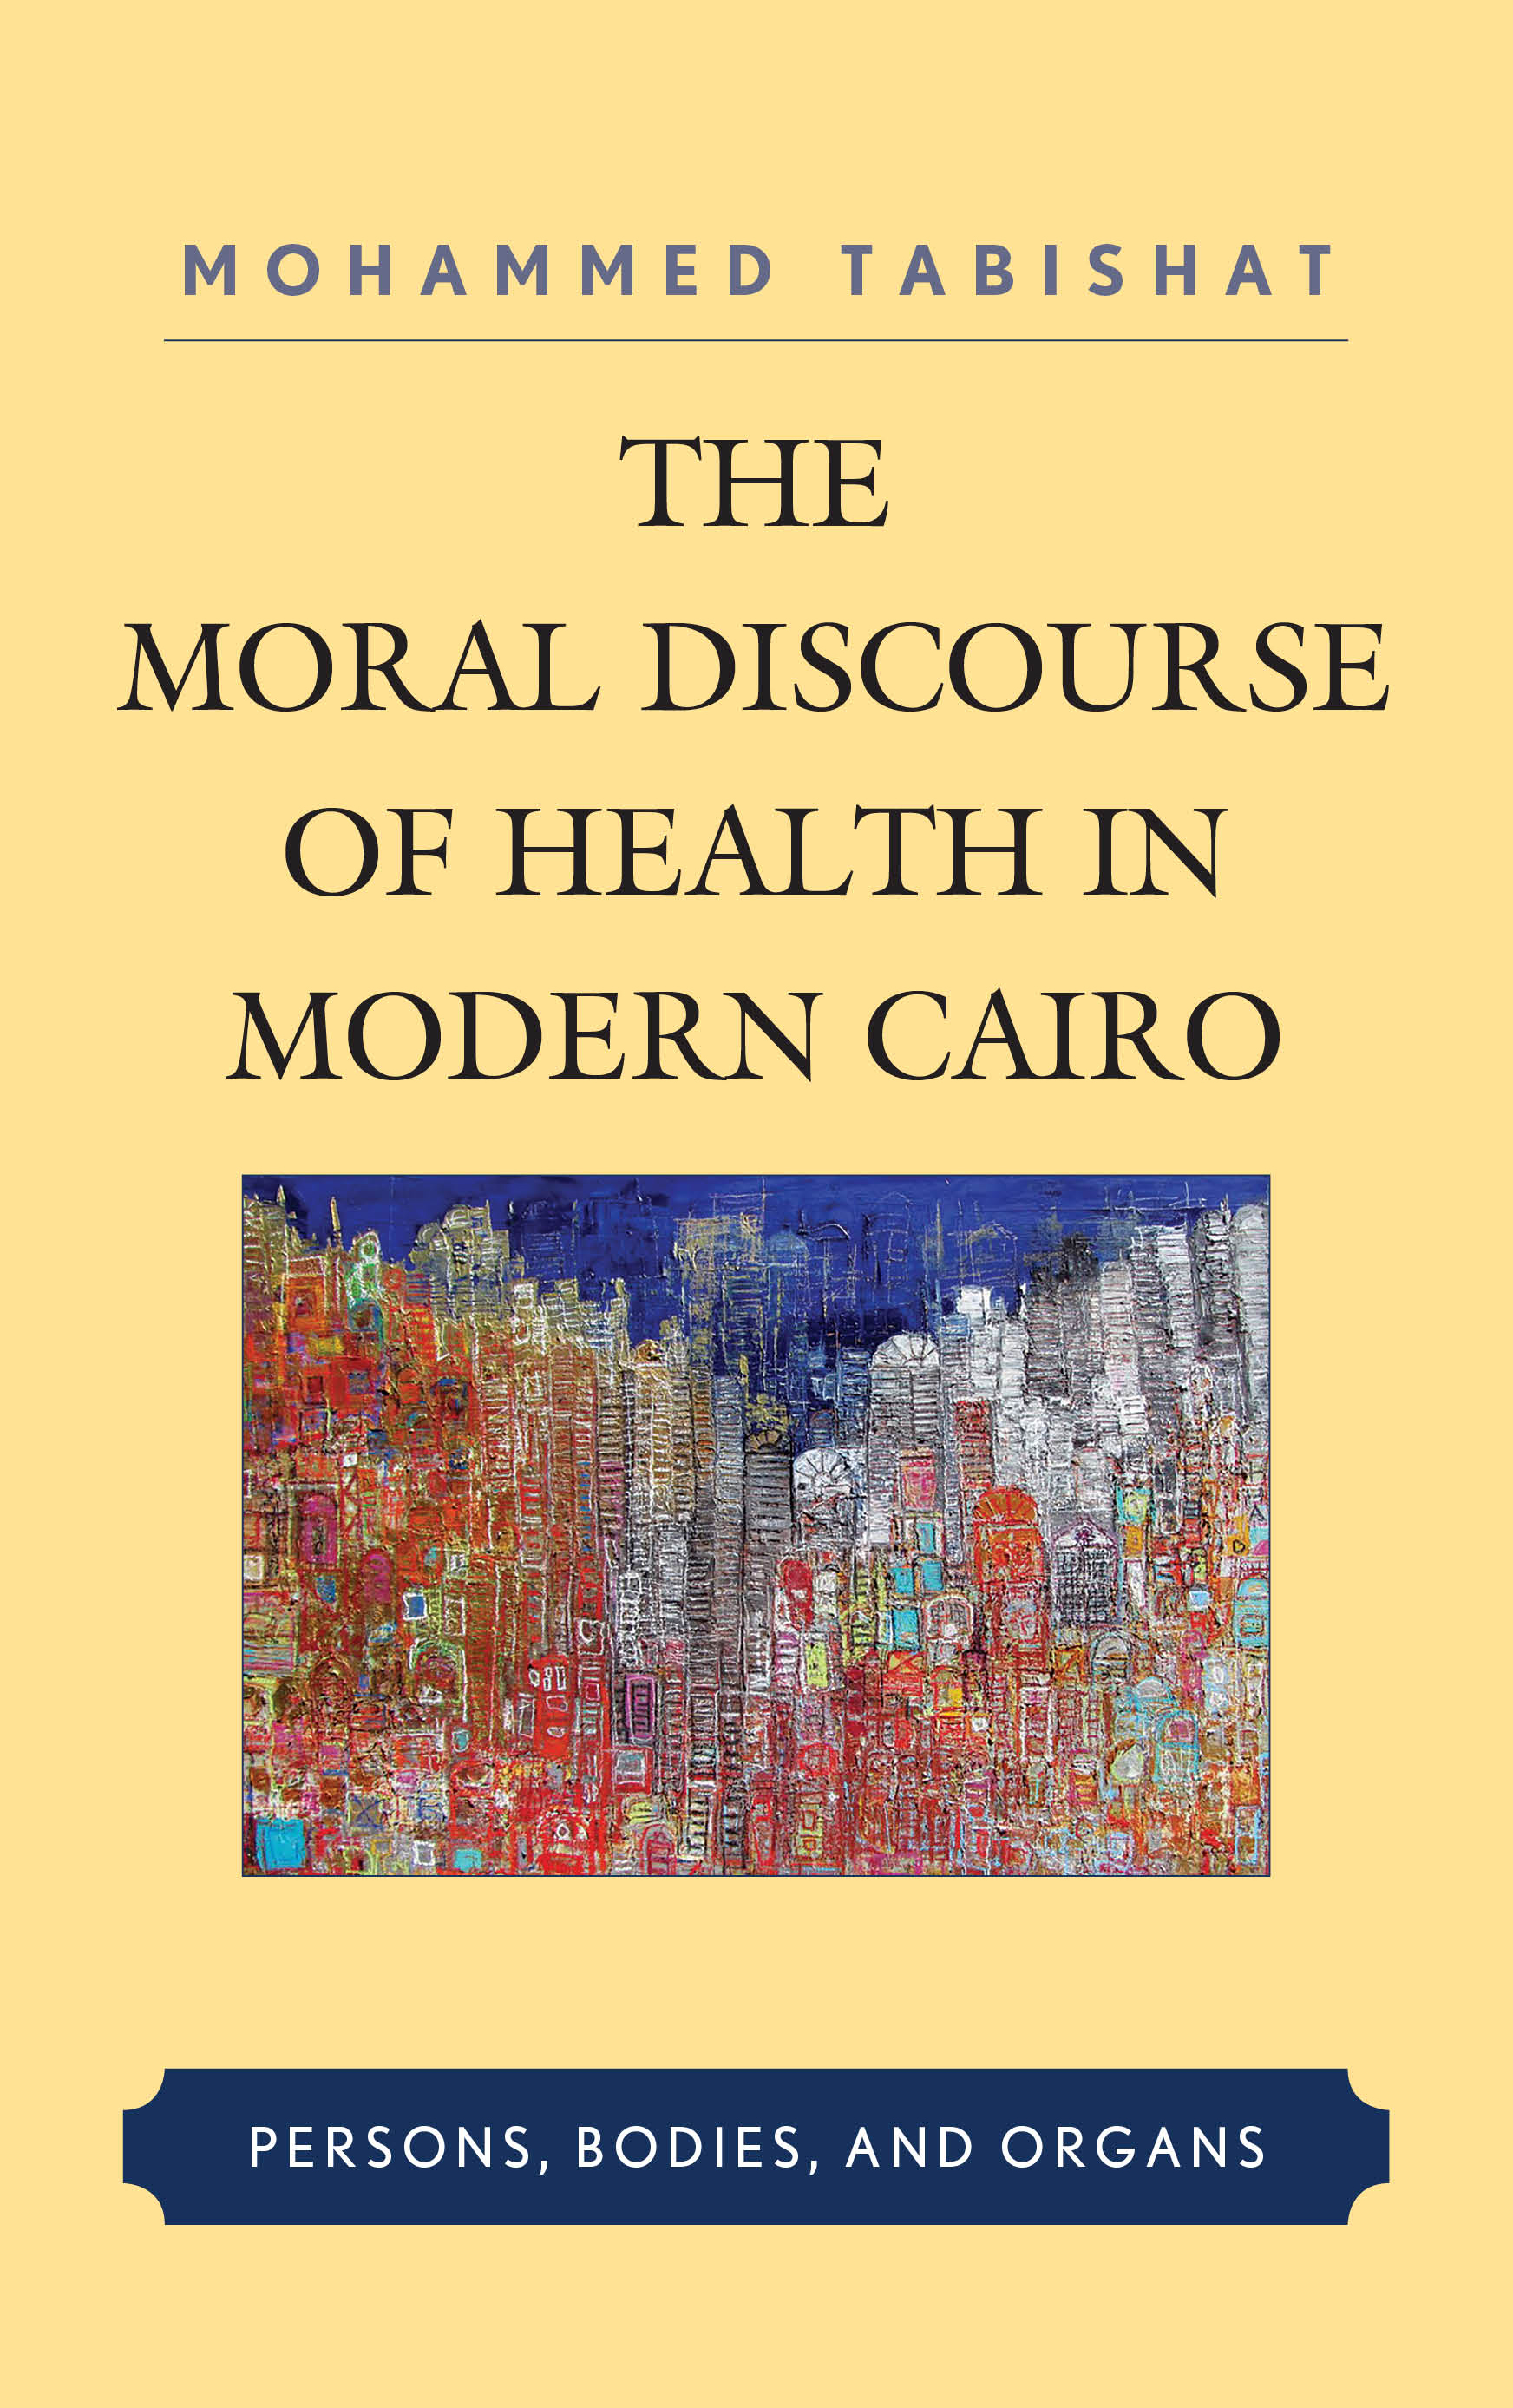 The Moral Discourse of Health in Modern Cairo: Persons, Bodies, and Organs